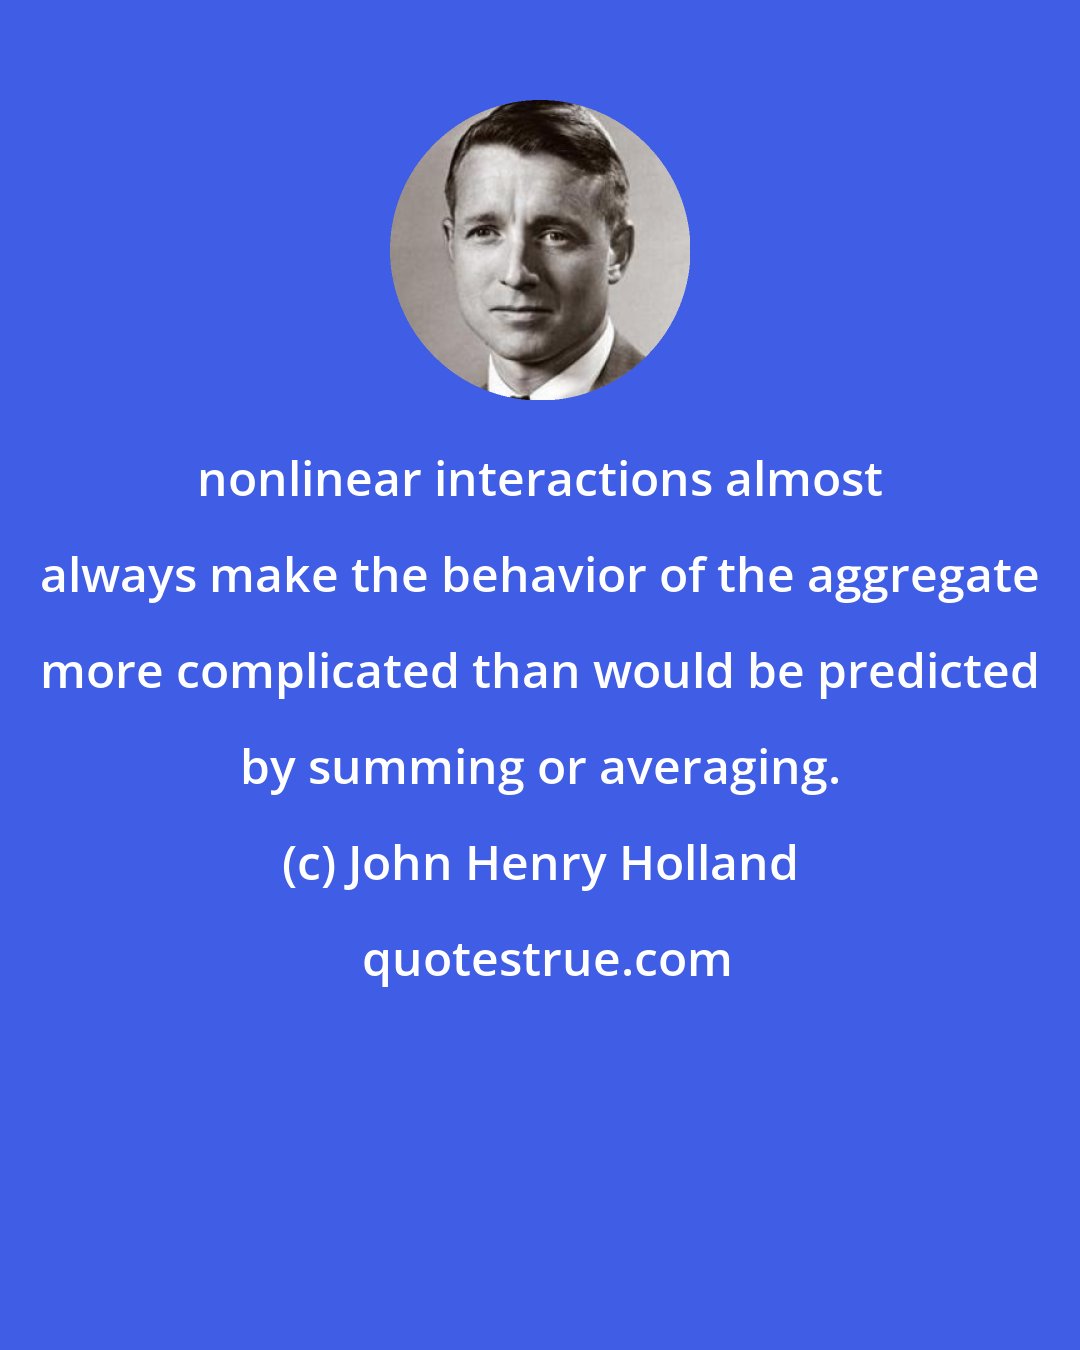 John Henry Holland: nonlinear interactions almost always make the behavior of the aggregate more complicated than would be predicted by summing or averaging.